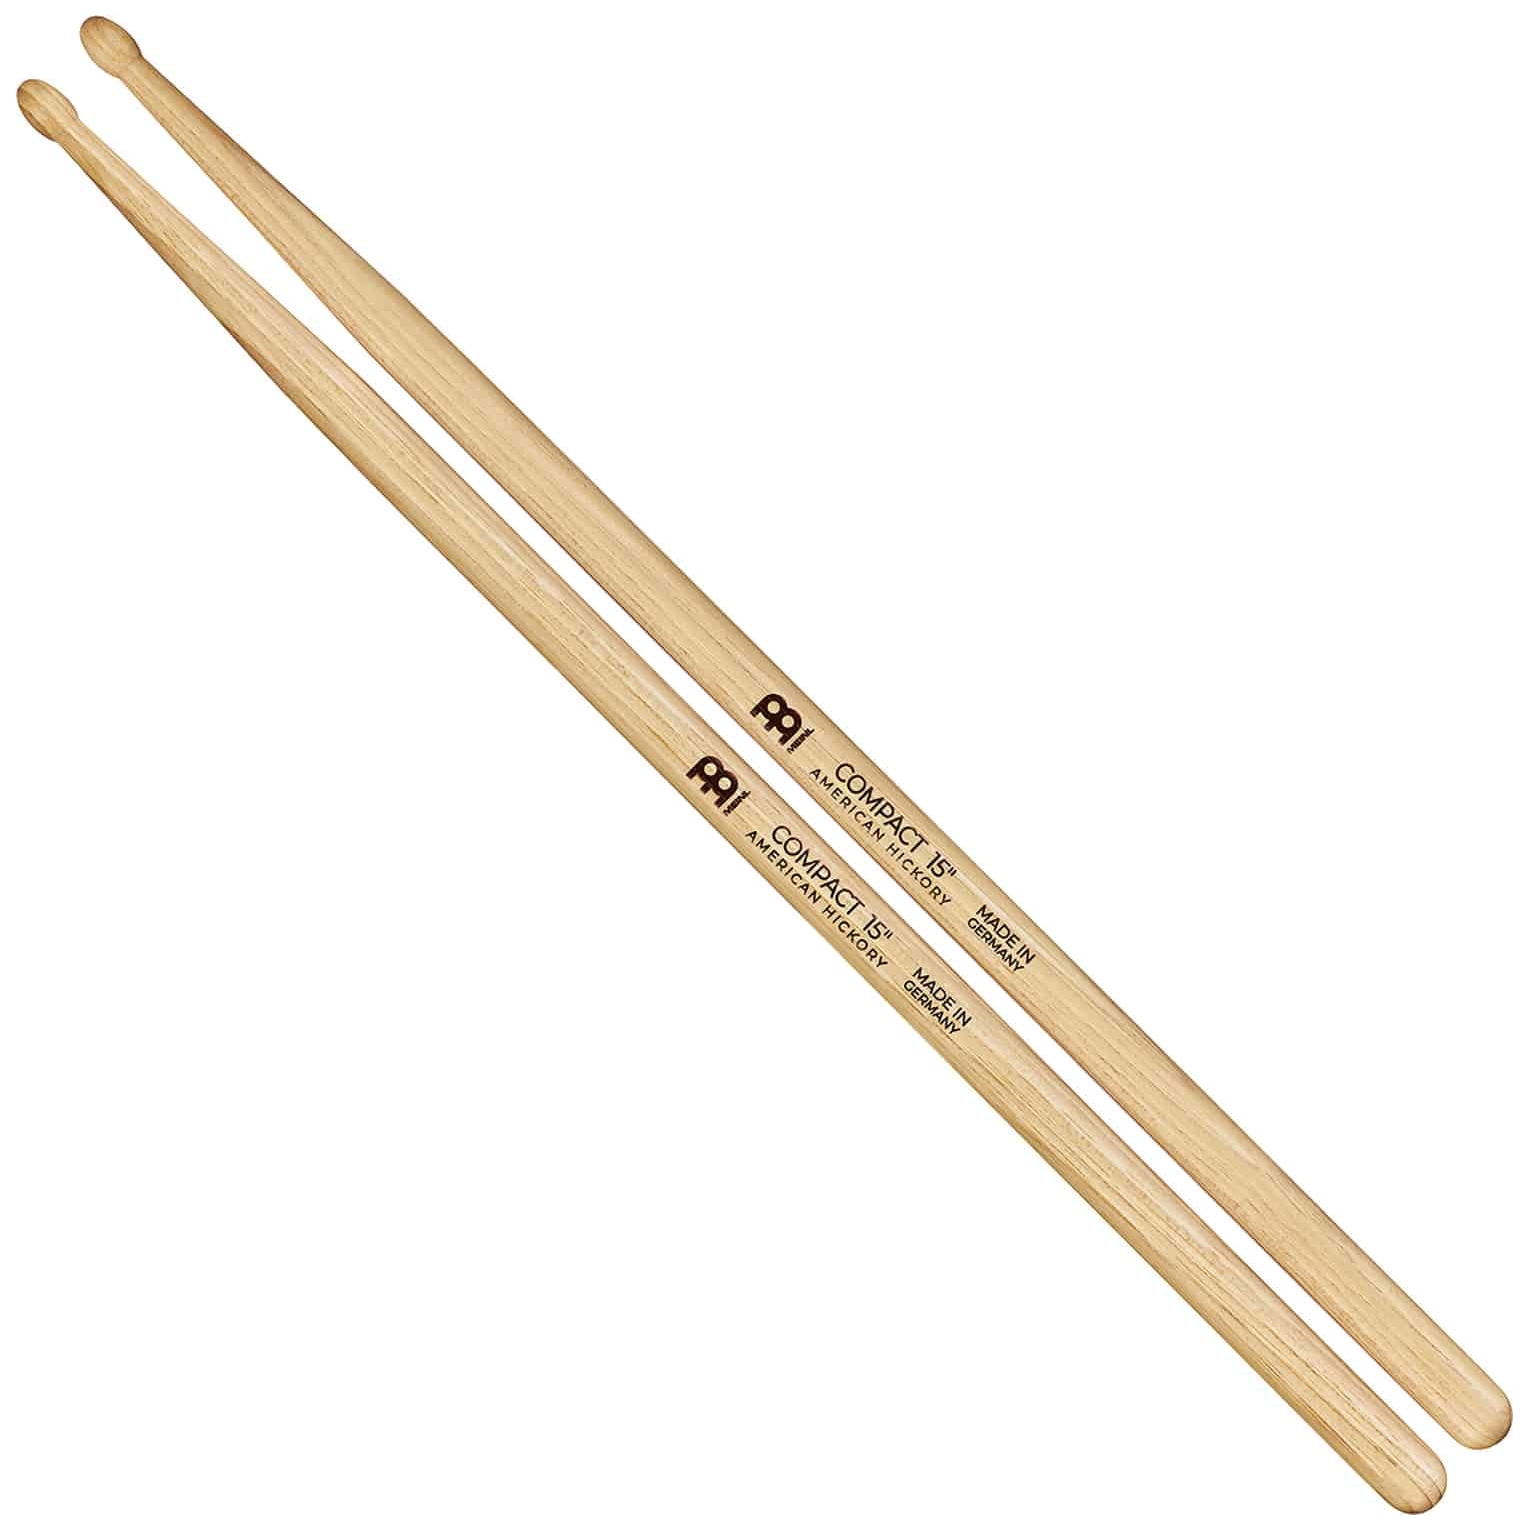 Meinl Stick & Brush Compact 15" Drumstick American Hickory